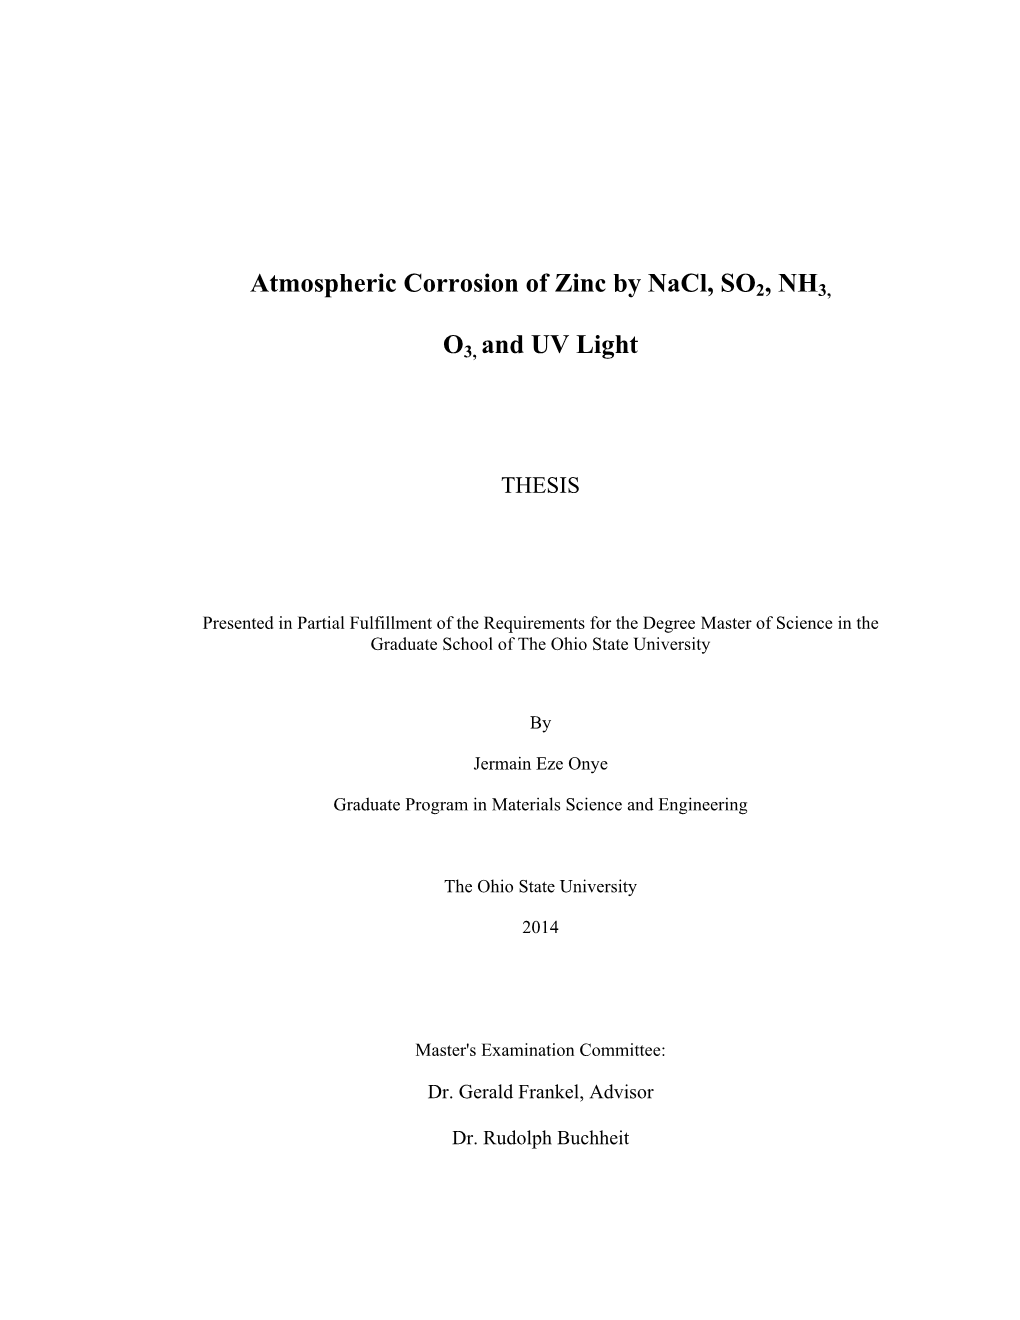 Atmospheric Corrosion of Zinc by Nacl, SO2, NH3, O3, and UV Light